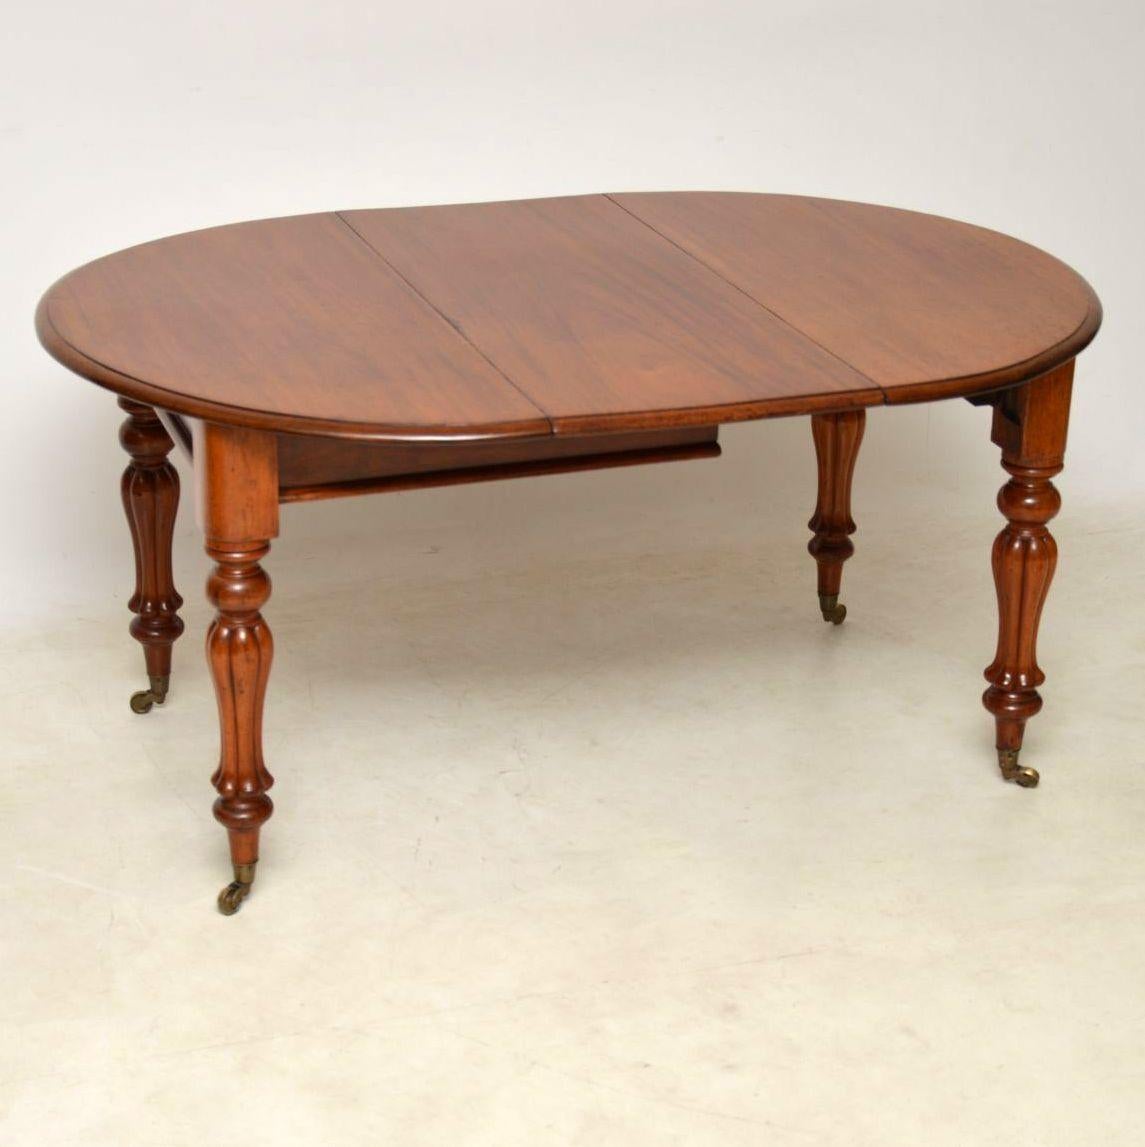 Antique William IV solid mahogany circular dining table that extends with one leaf to seat six people. It’s in excellent original condition with a good patina and plenty of character. This table has the typical William IV turned and fluted tulip